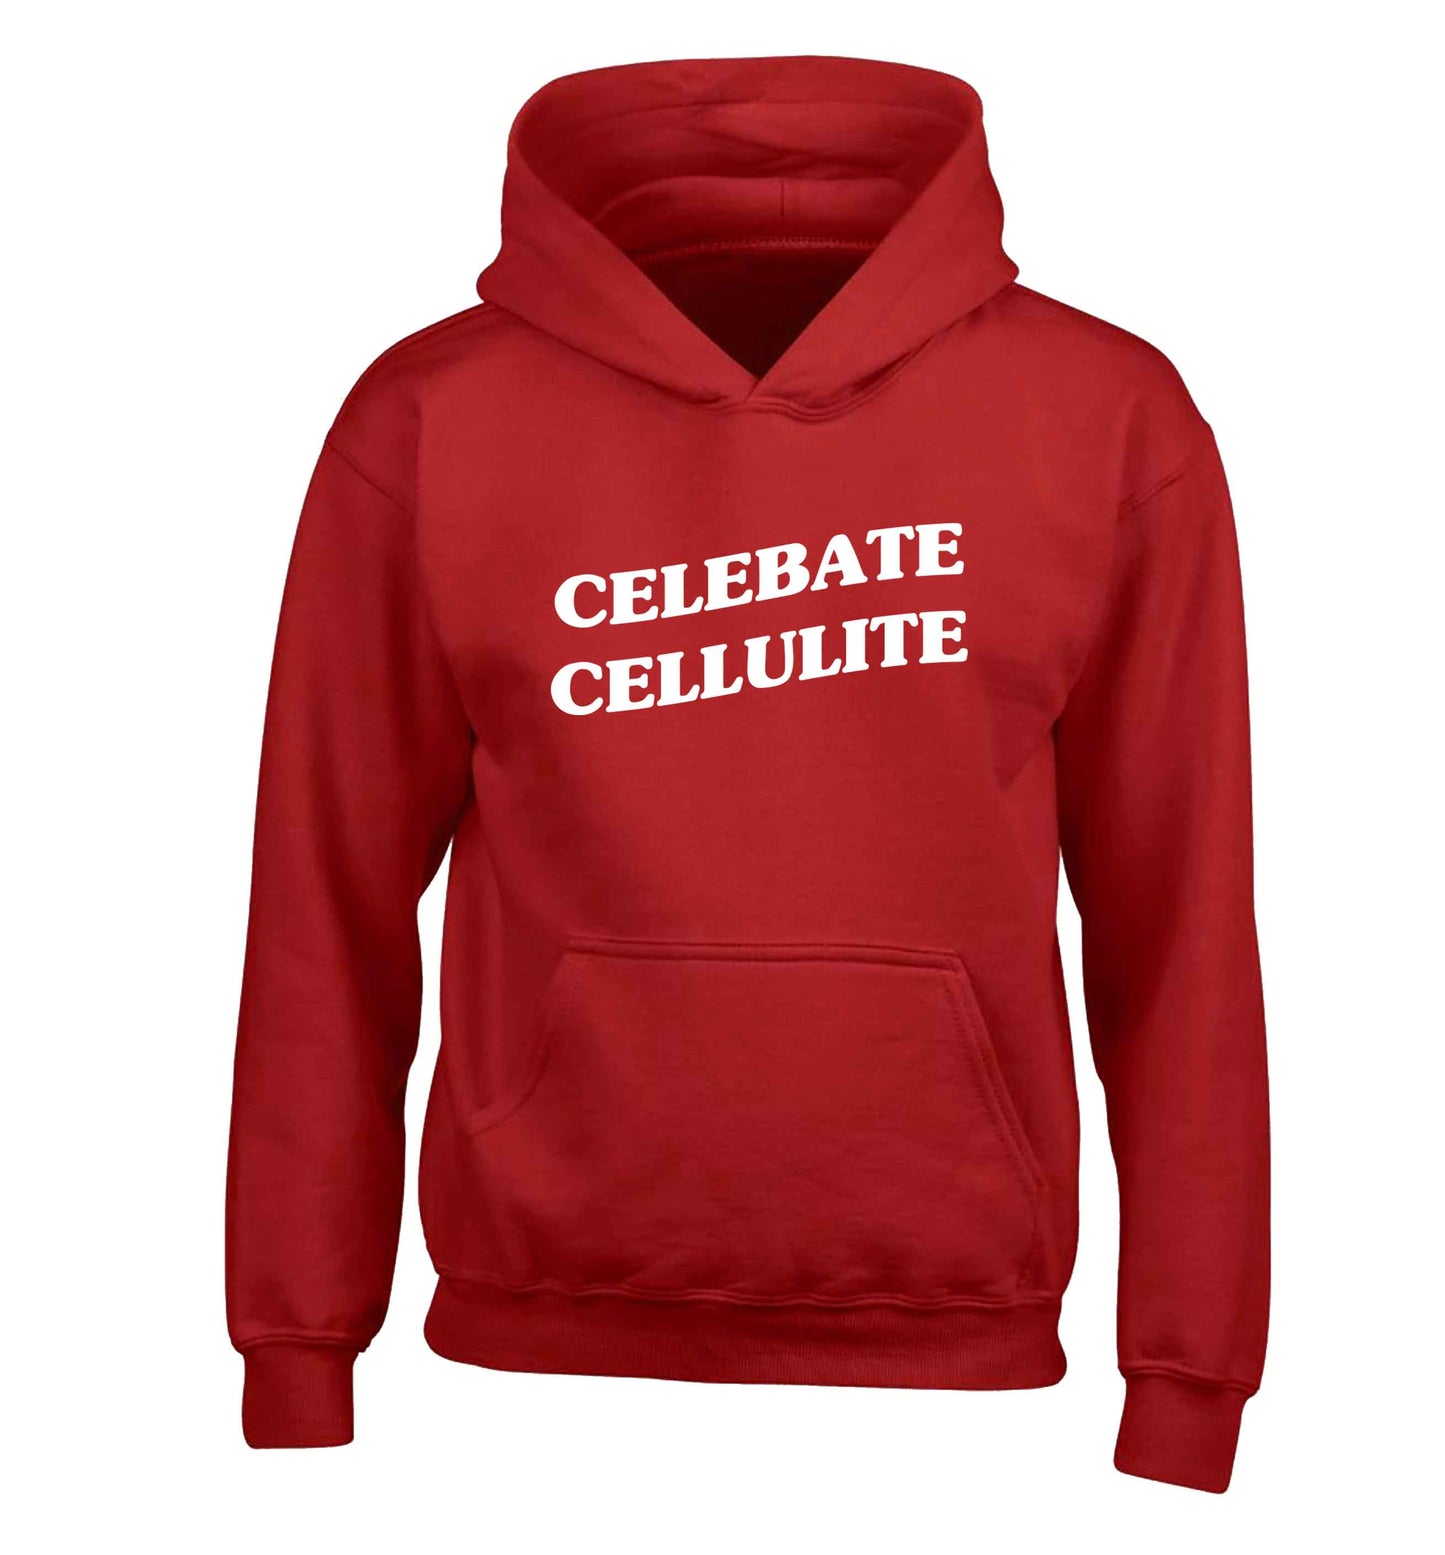 Celebrate cellulite children's red hoodie 12-13 Years